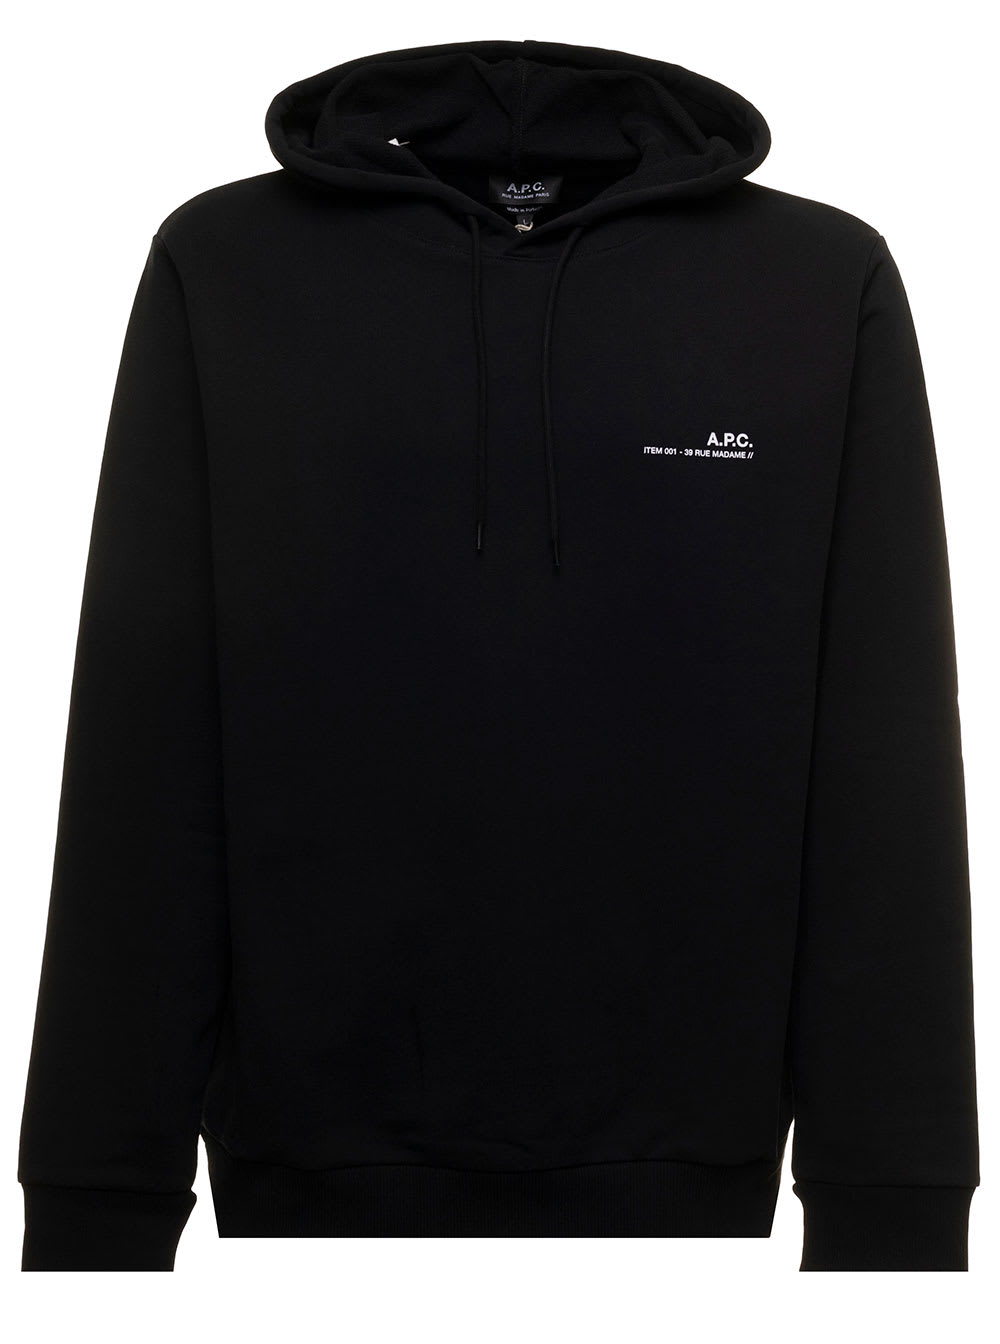 Black Hoodie In Fleece Cotton With Contrasting Lettering On The Chest A.p.c. Man